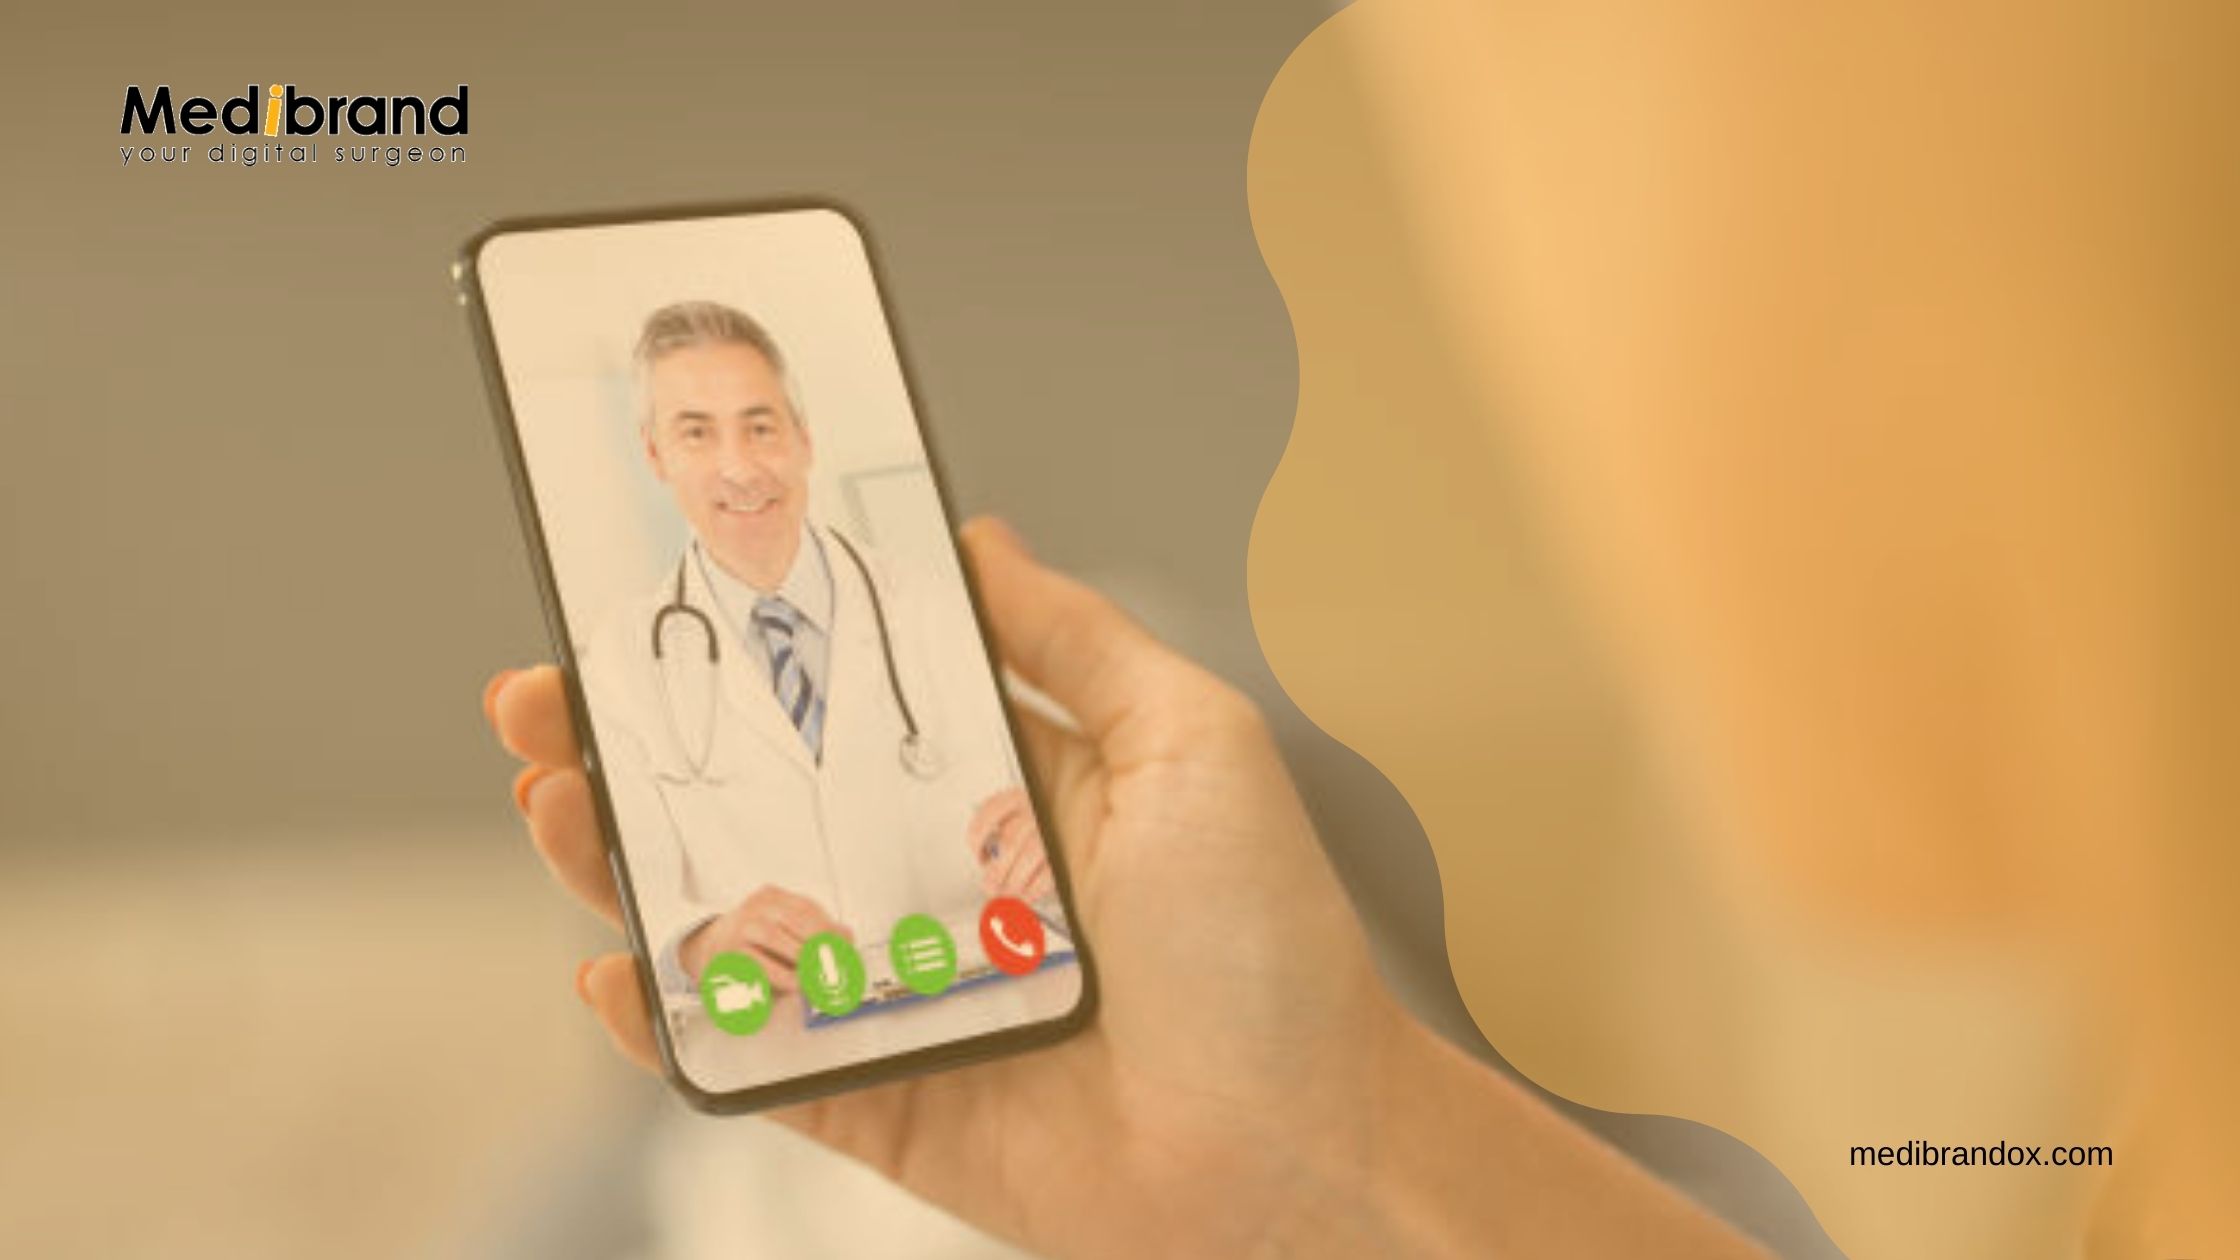 Article about Fundamental of Telemedicine Applications in Healthcare Industry